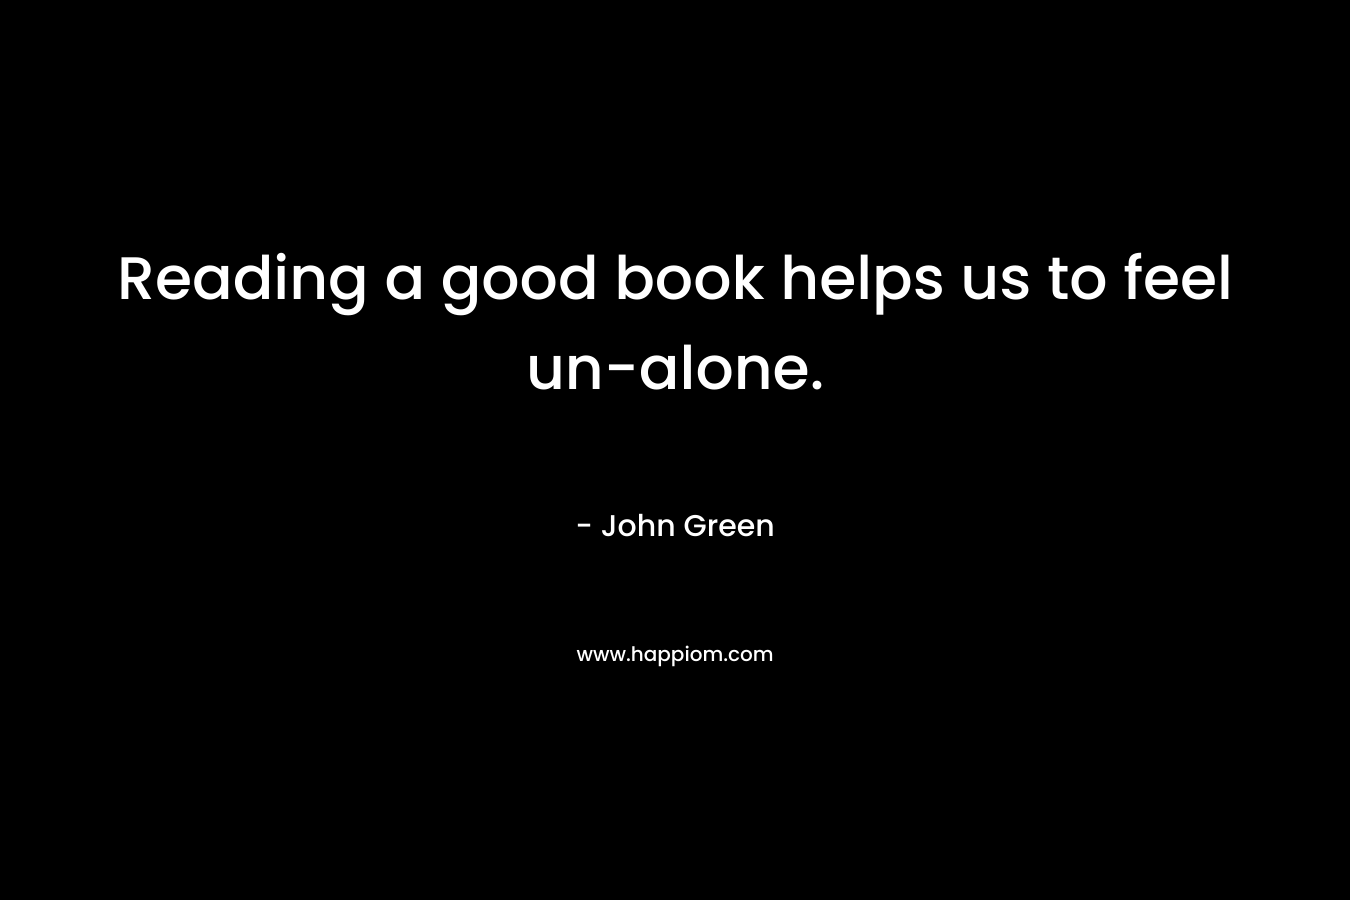 Reading a good book helps us to feel un-alone.